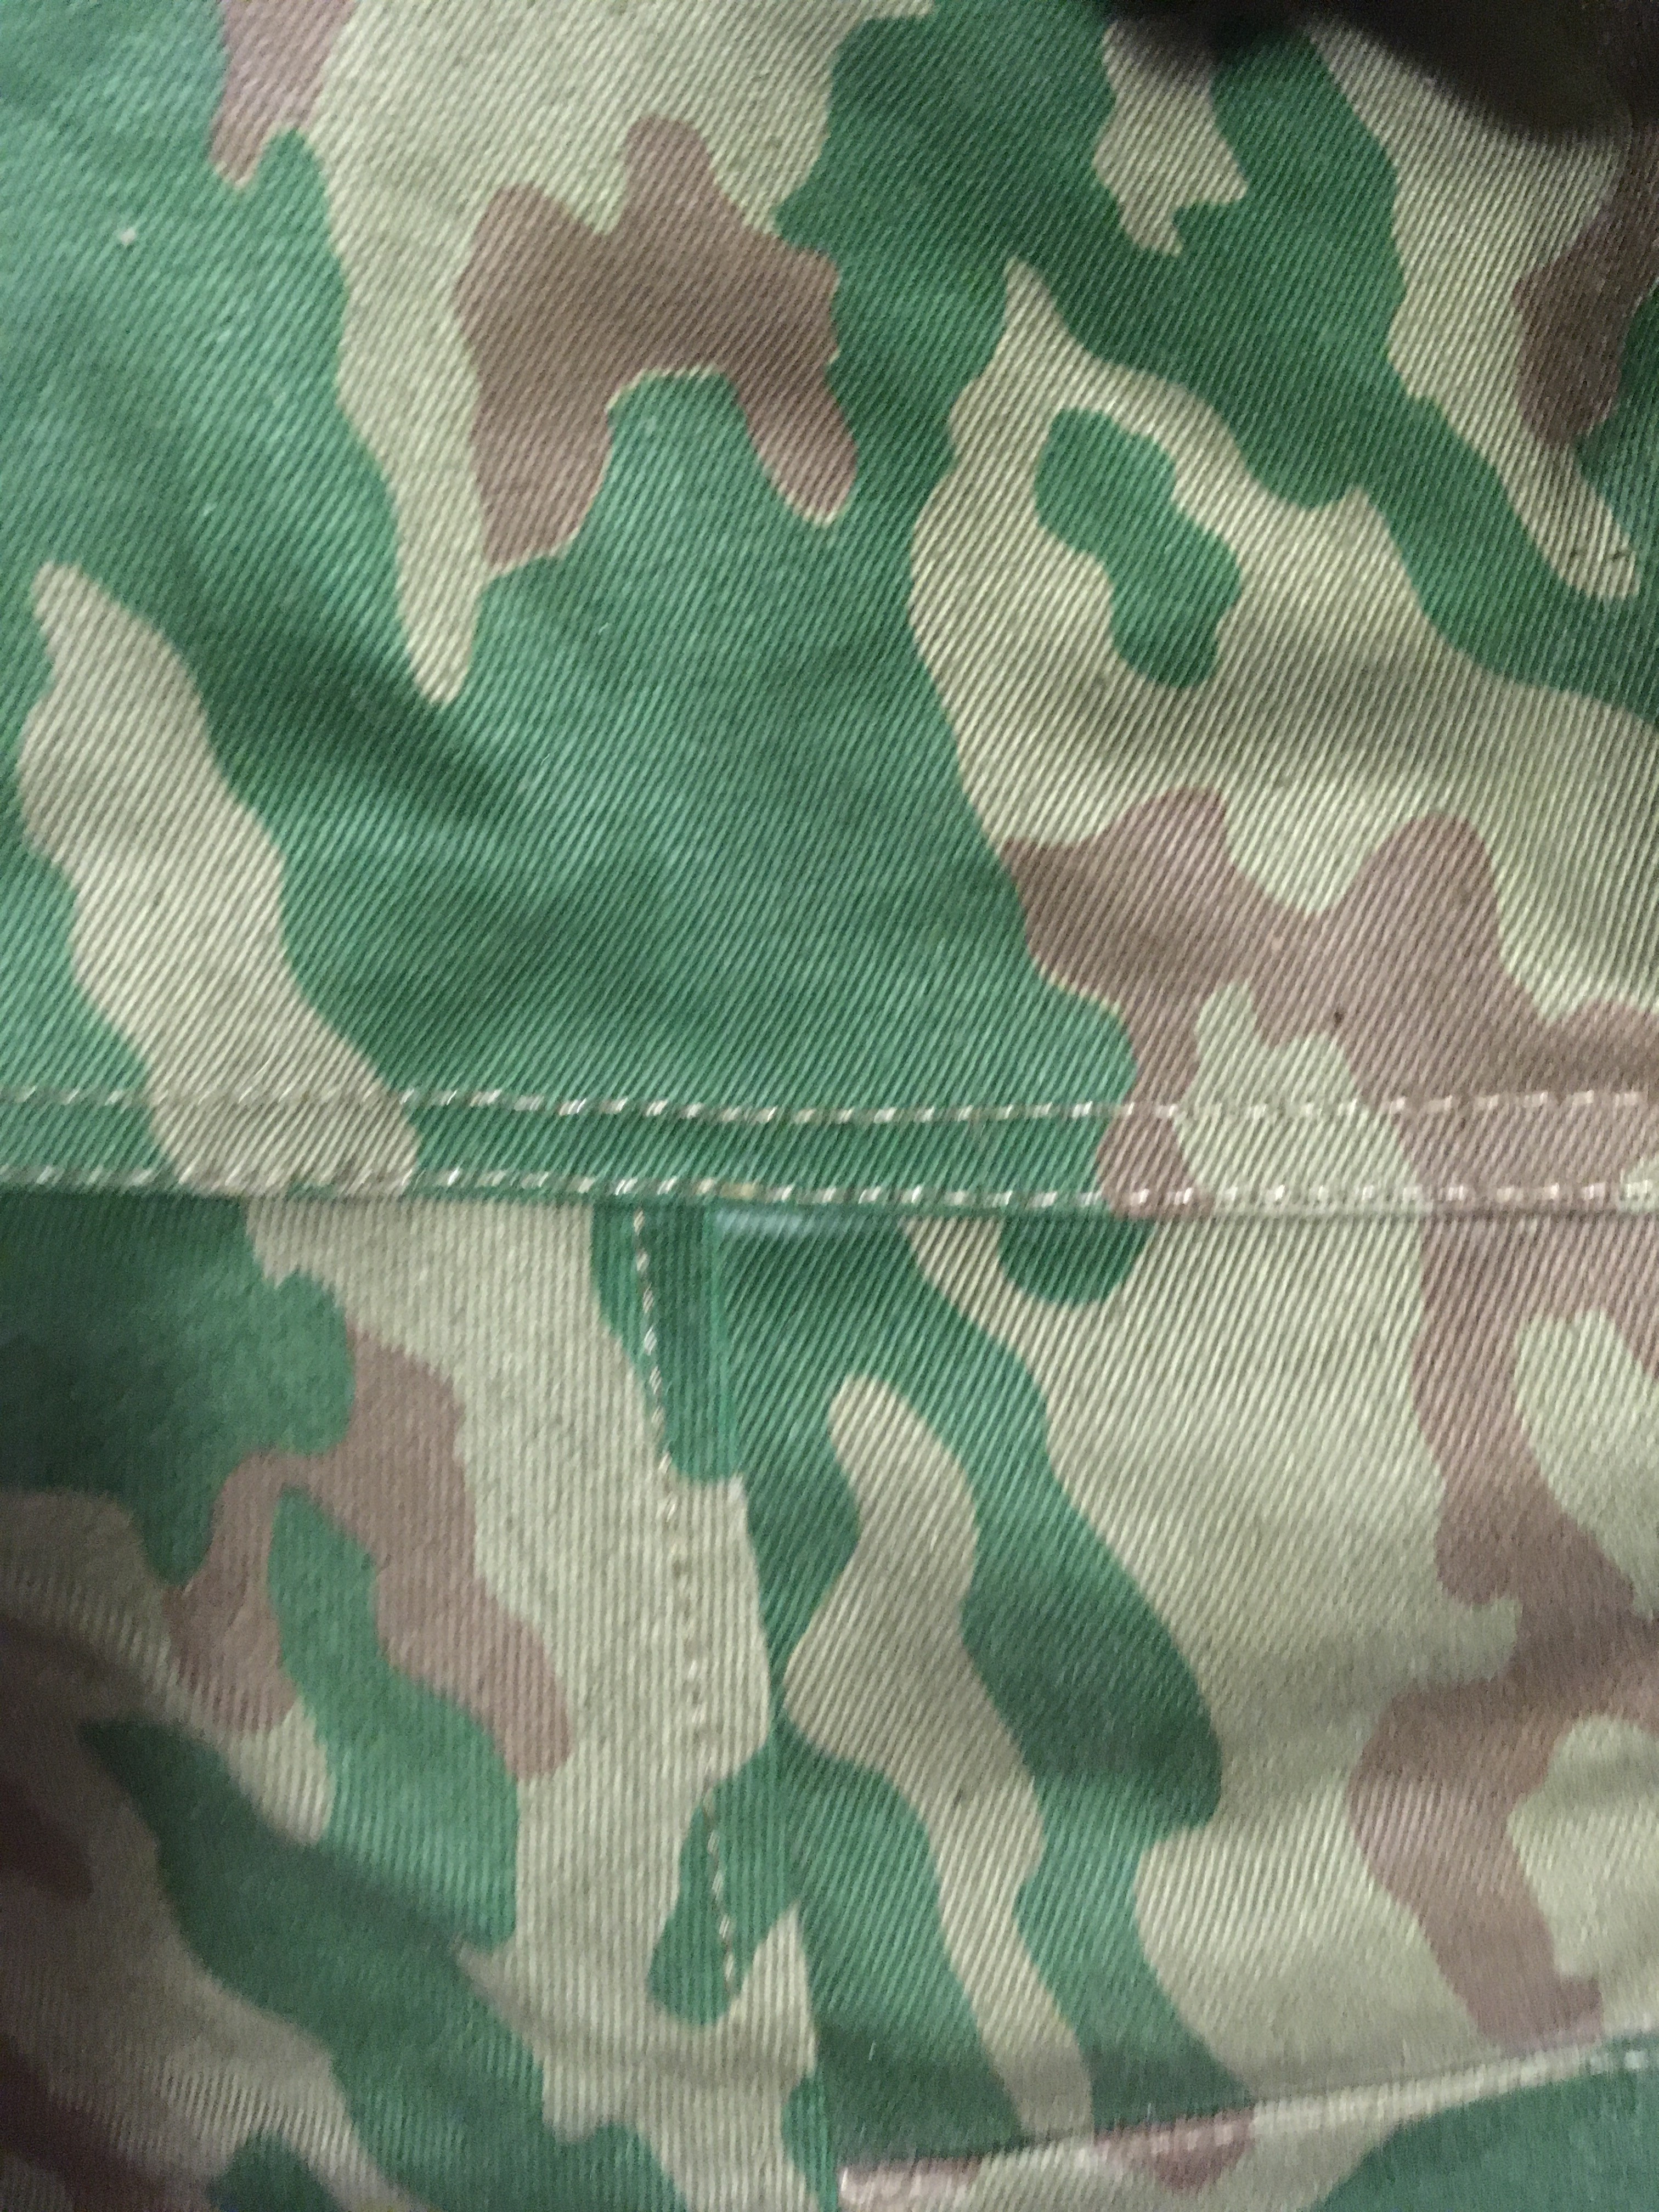 What is the name of this Soviet camoflage pattern? | AK Rifles